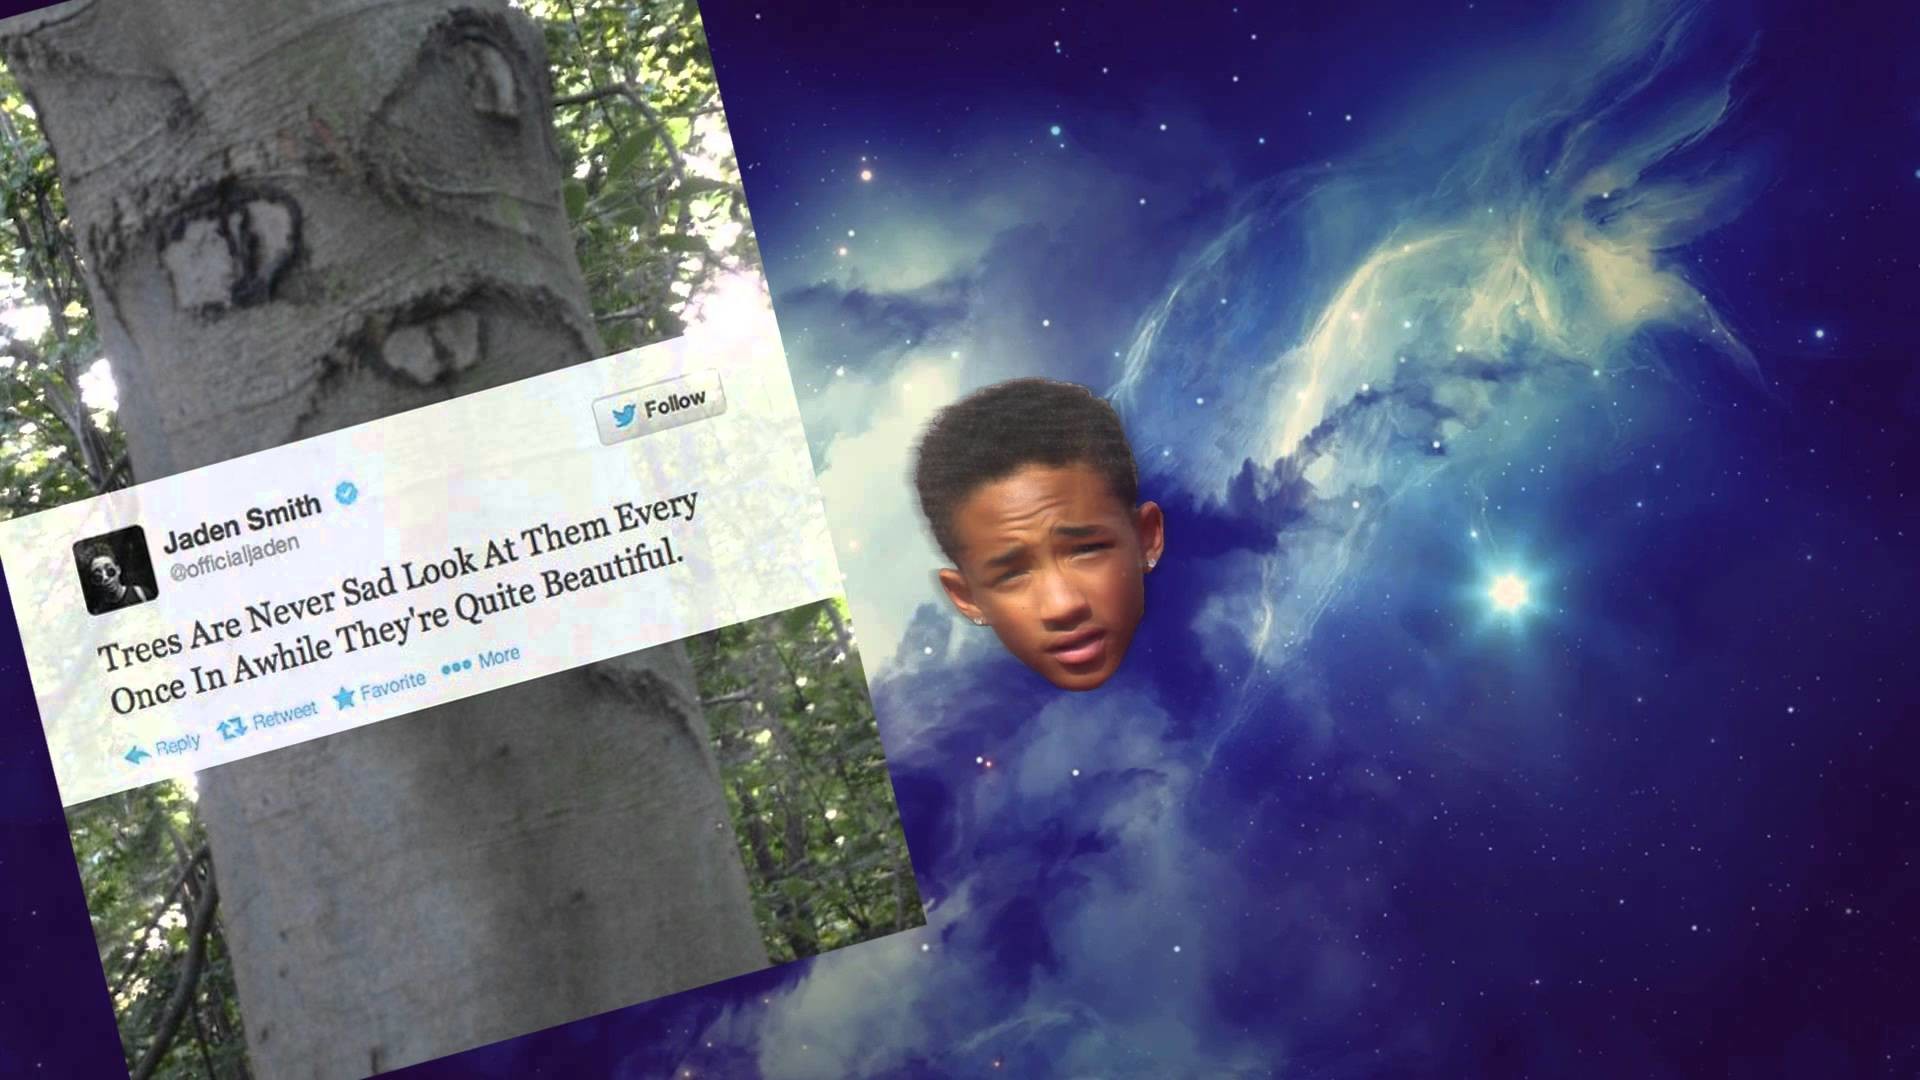 1920x1080 Jaden Smith Drops Enigmatic Song on Willow's Soundcloud Titled "Offering" |  IX Daily